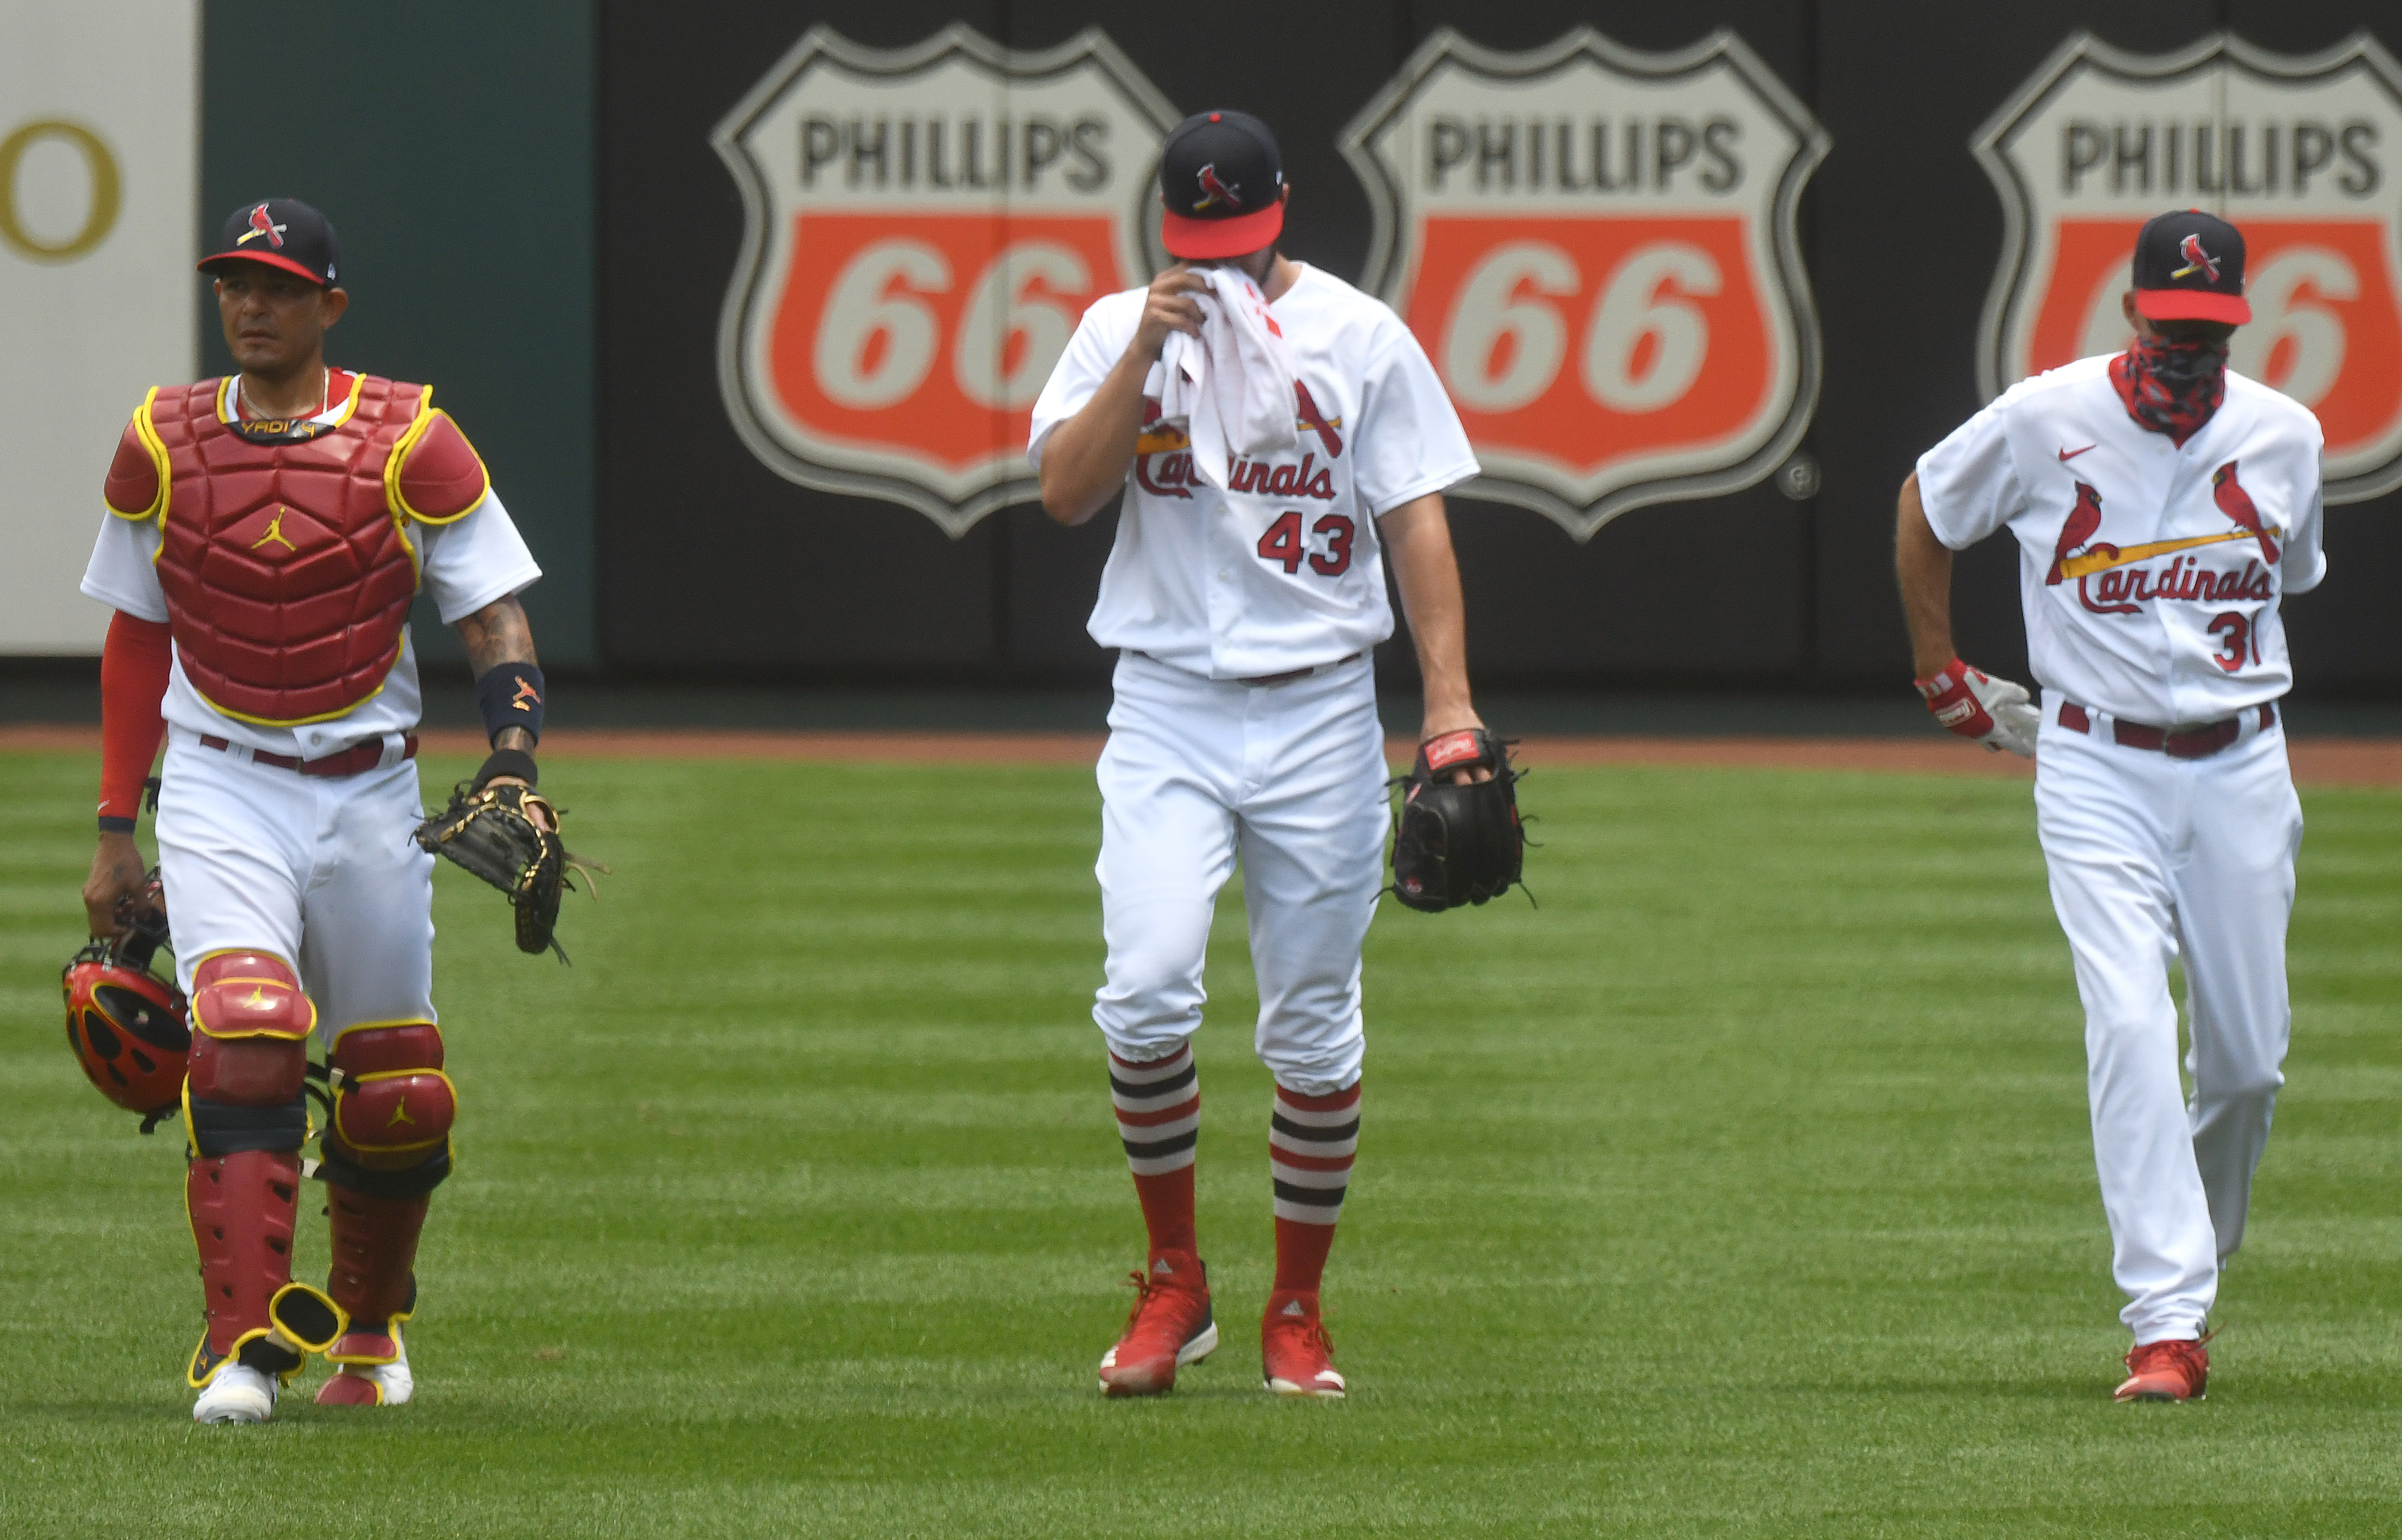 From left, St. Louis Cardinals catcher Yadier Molina, starting pitcher Dakota Hudson and pitching coach Mike Maddox make their way to the dugout after warming up before a Major League Baseball game between the Pittsburgh Pirates and the St. Louis Cardinals, on July 26, 2020, at Busch Stadium, St. Louis, MO. (Photo by Keith Gillett/Icon Sportswire via Getty Images)